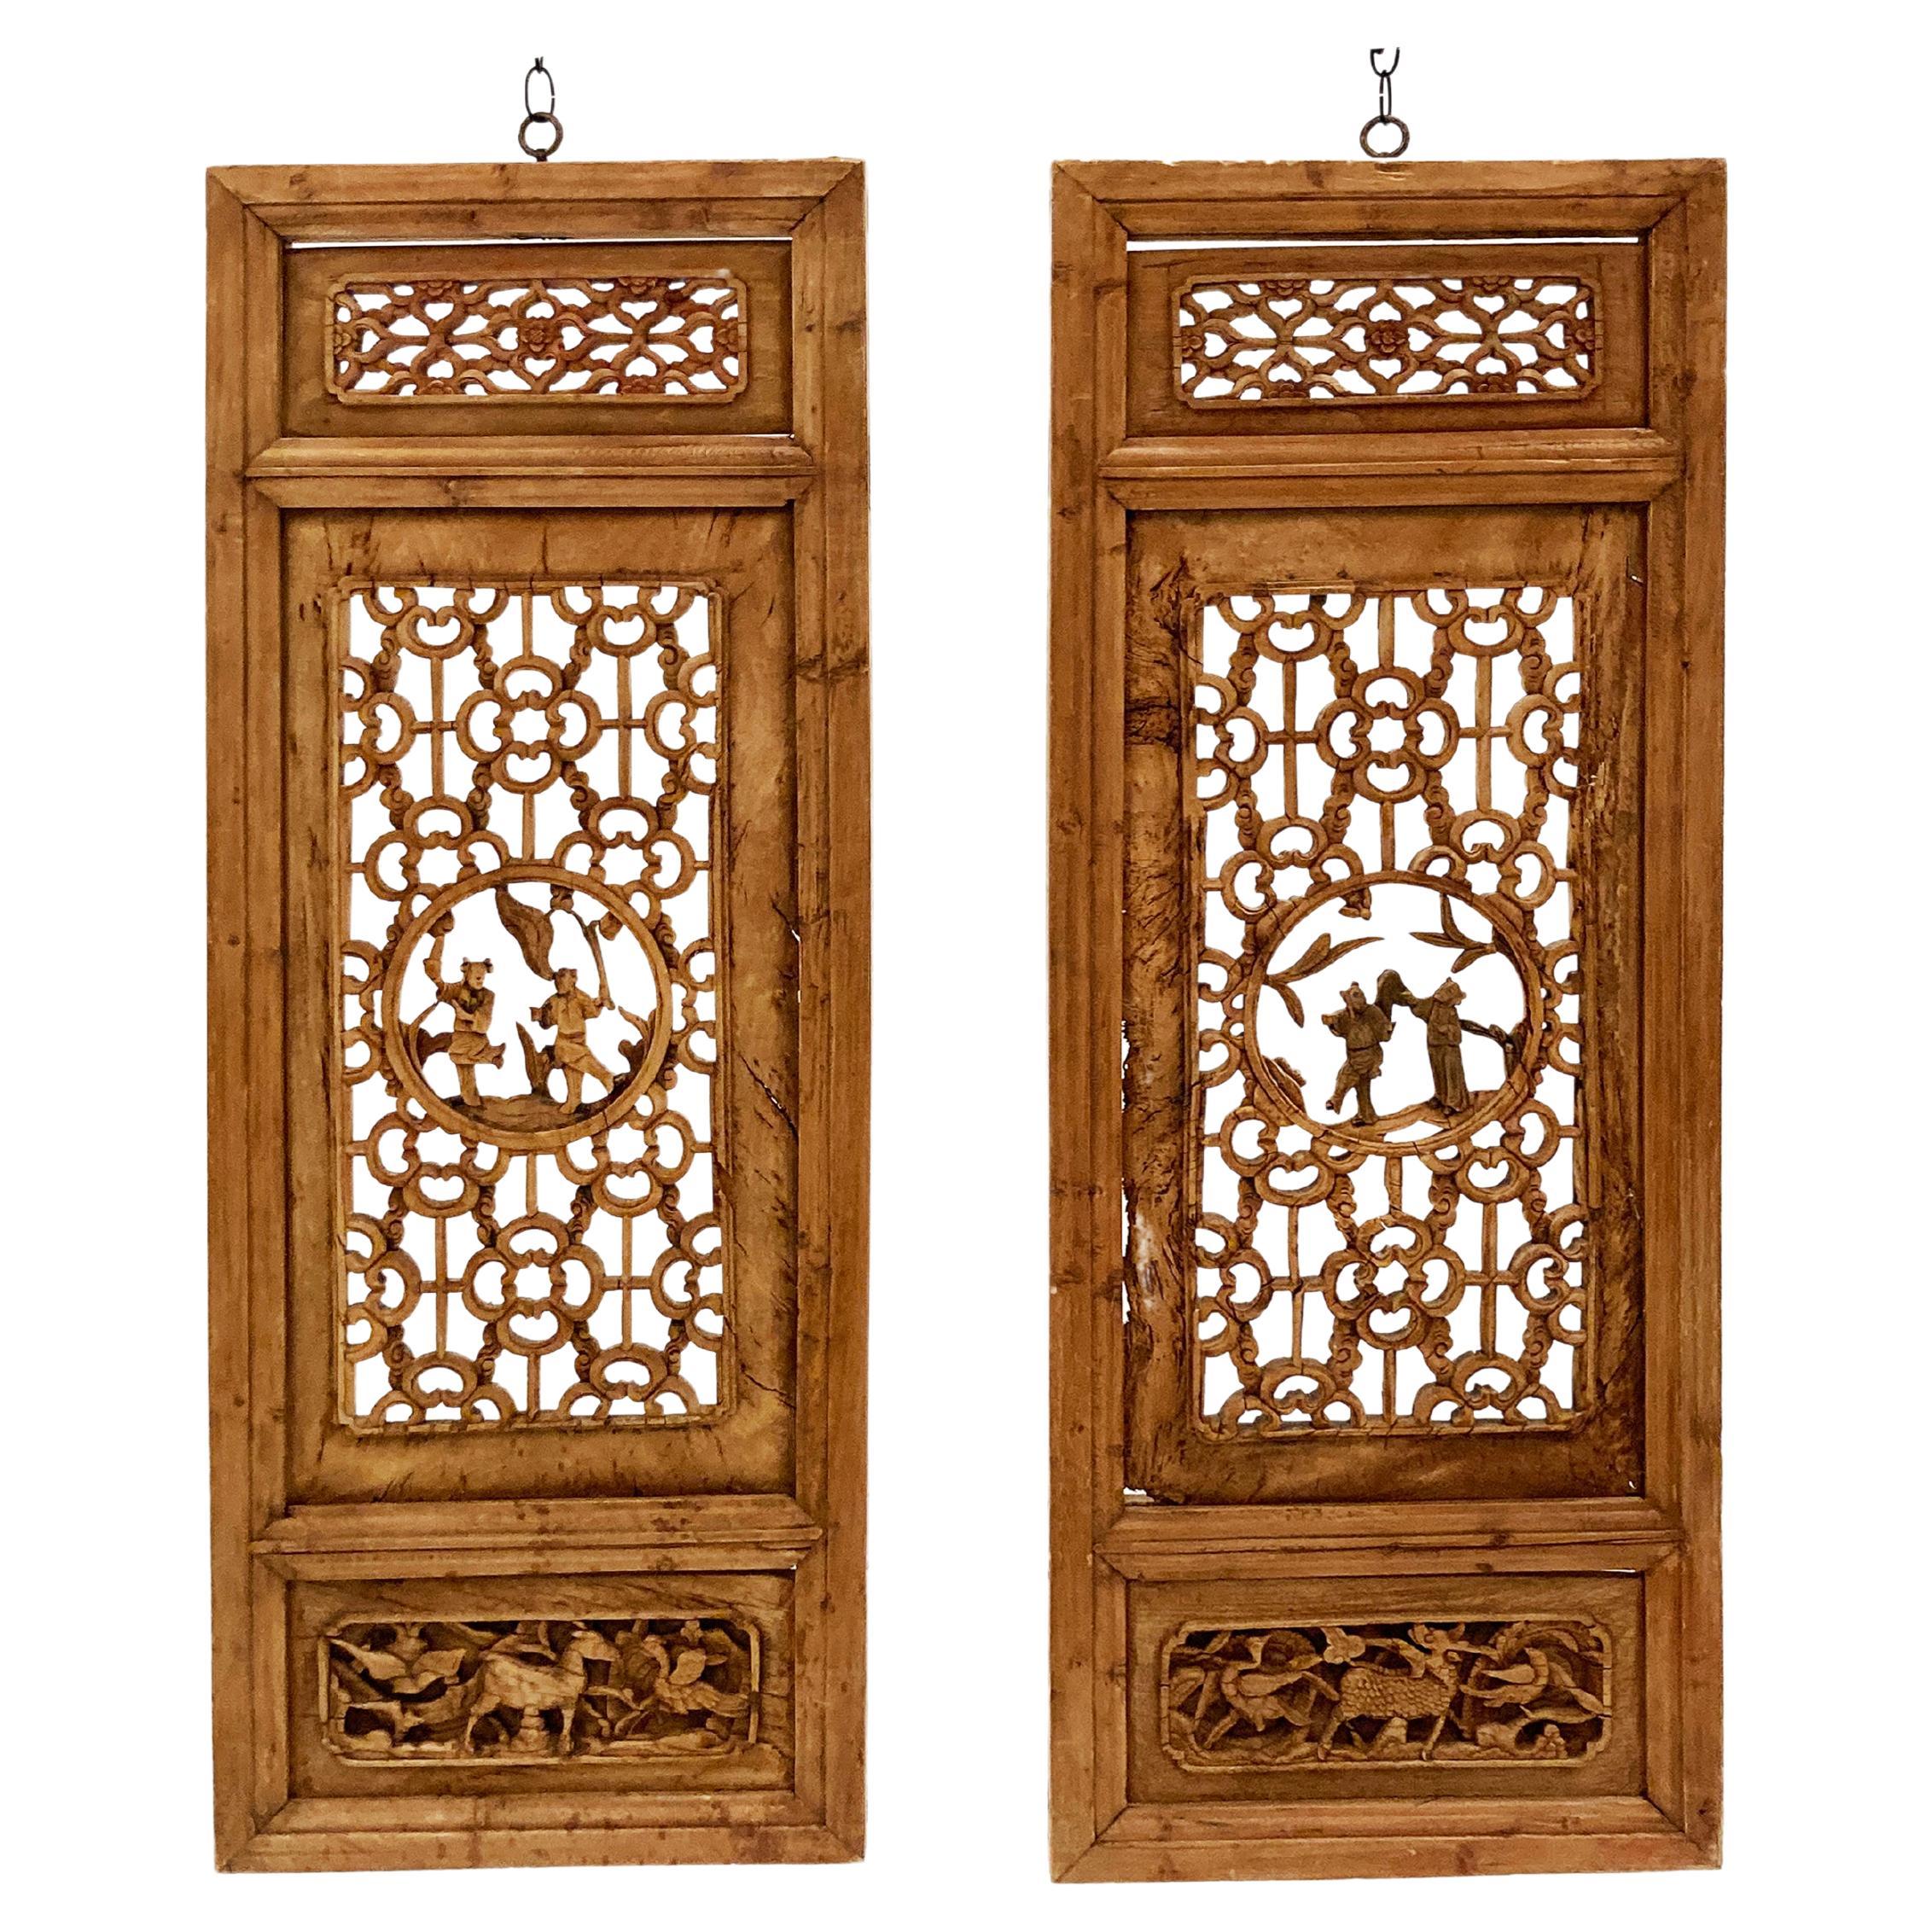 Late 18th C. Chinese Wooden Hand-carved Panels From the Qing Dynasty - a Pair For Sale